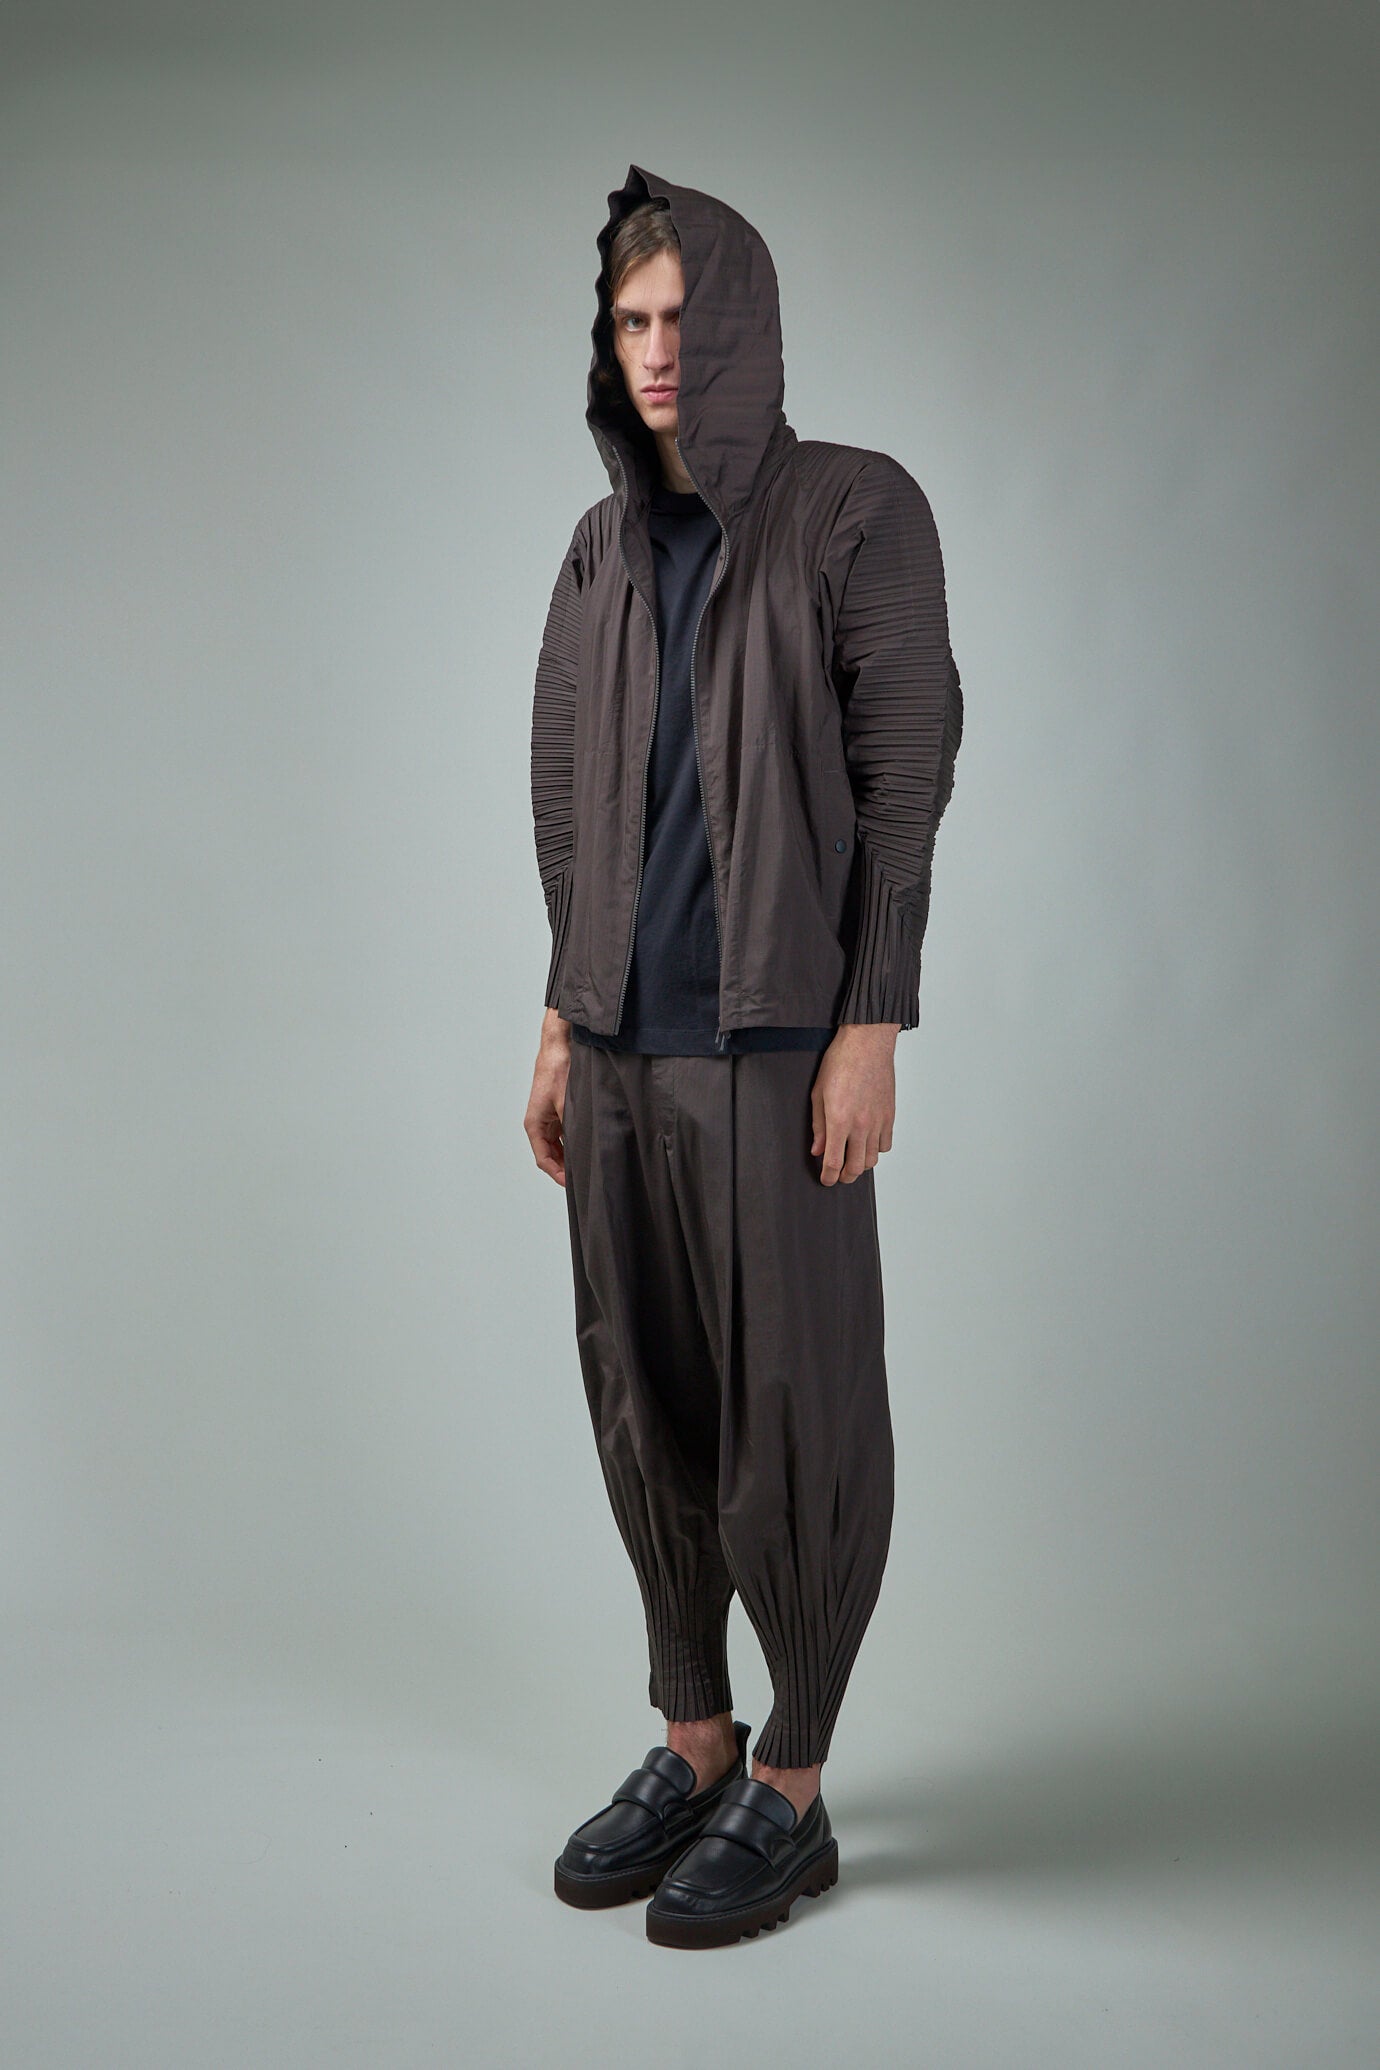 Homme Plissé Issey Miyake – Page 2 – LABELS